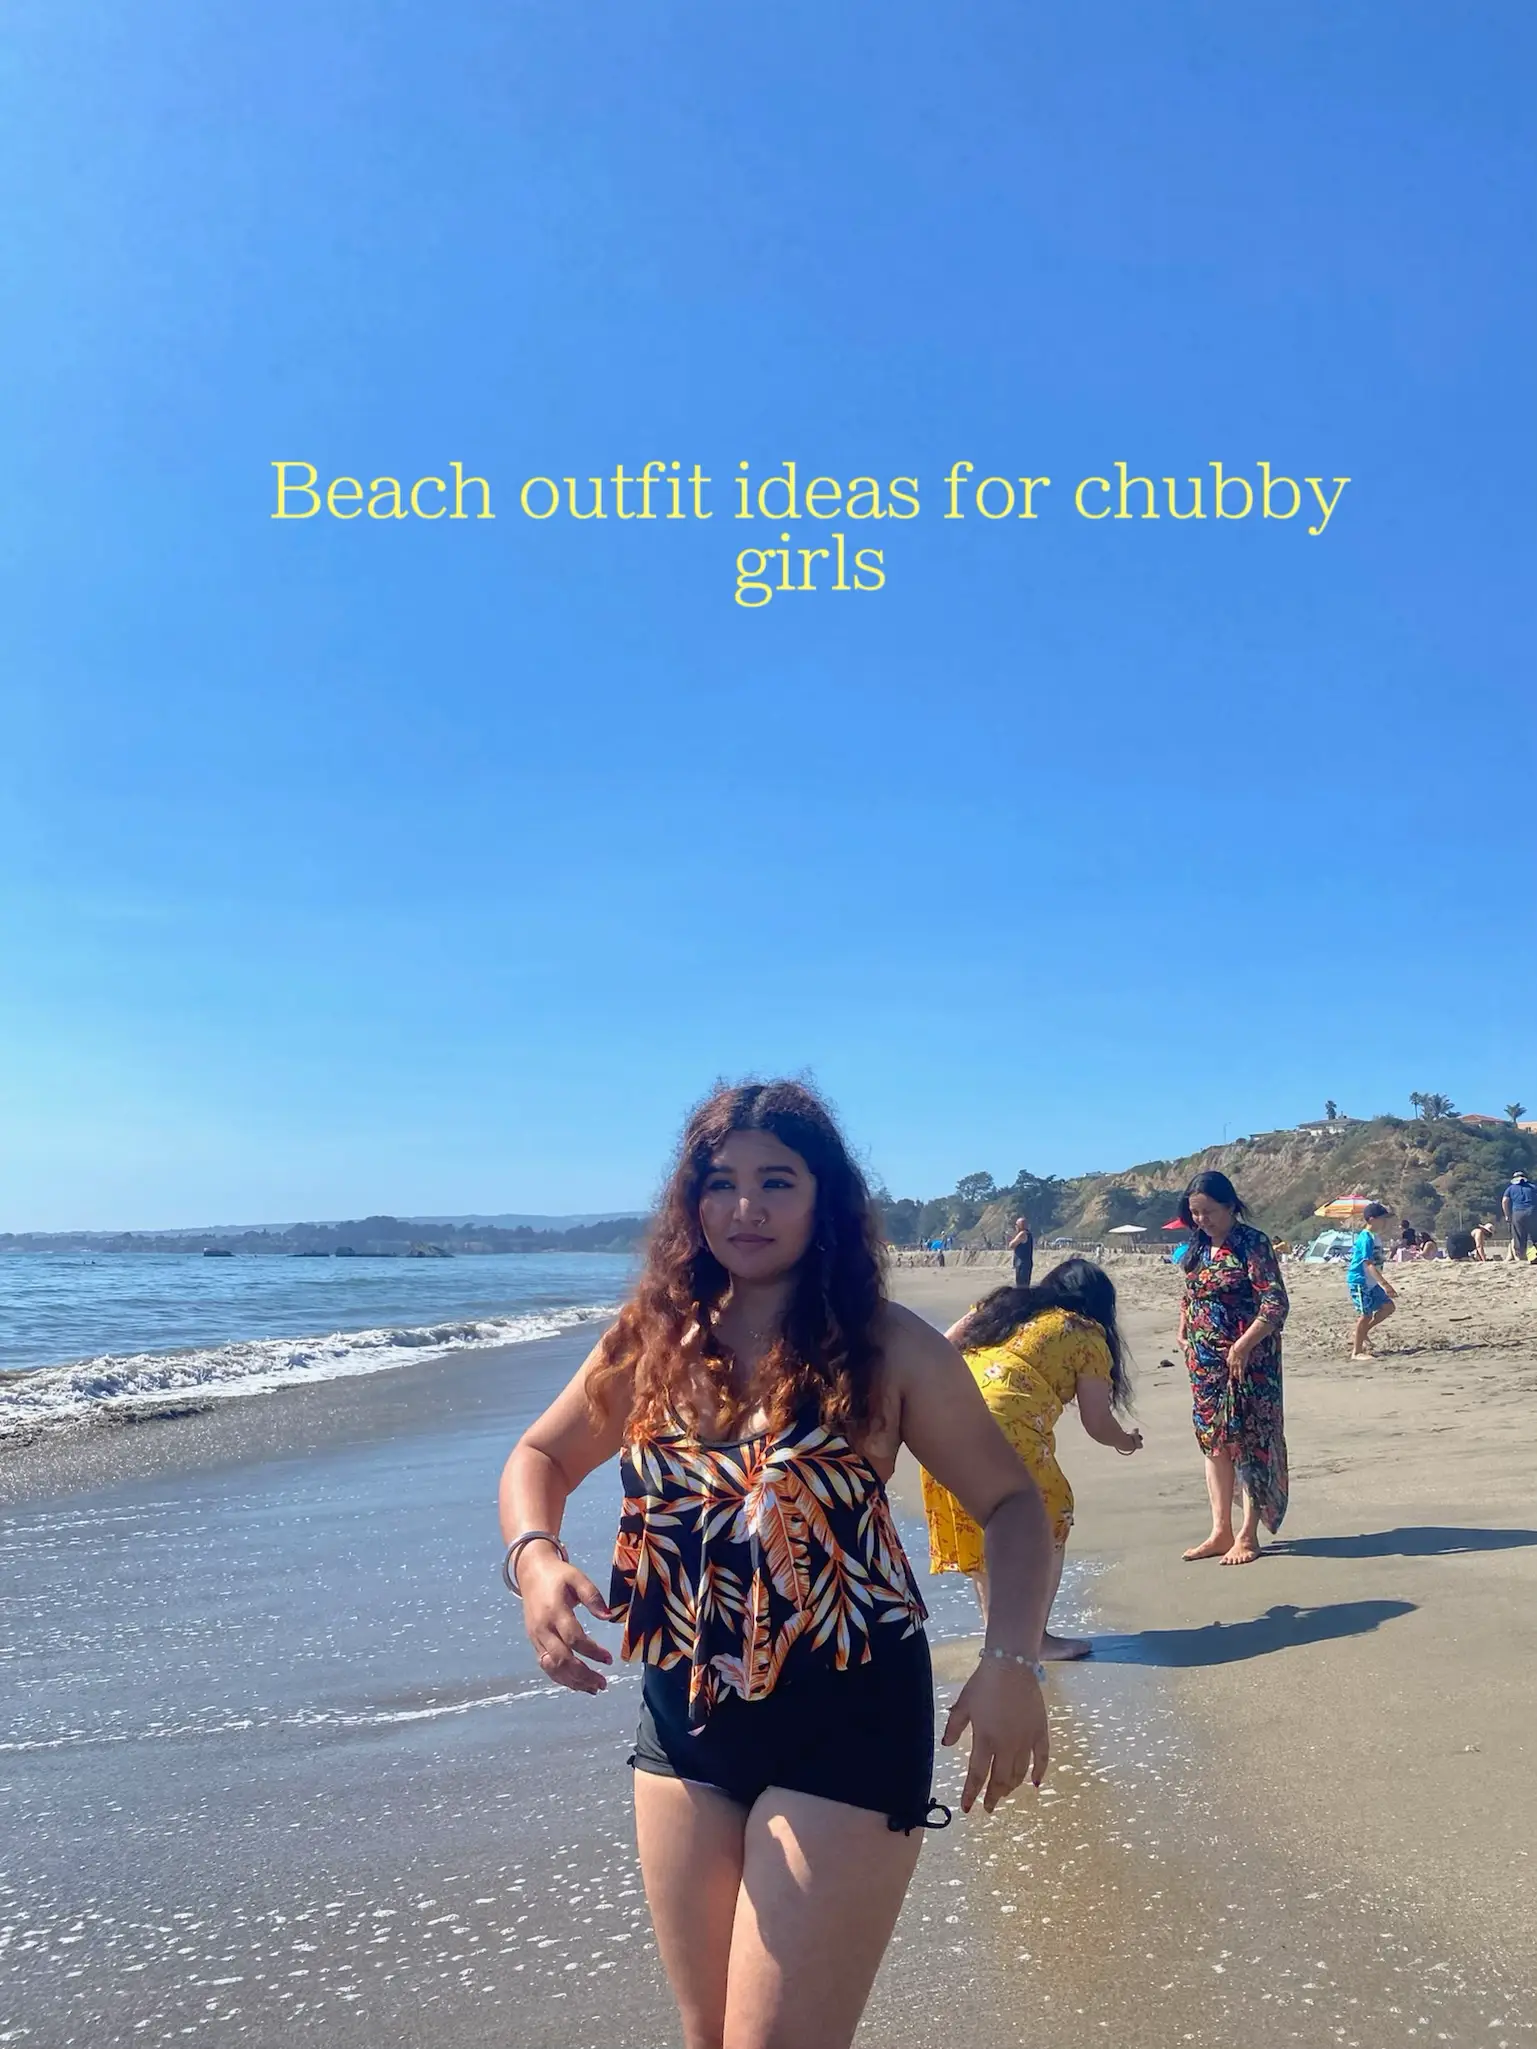 Beach outfit ideas for chubby girls, Gallery posted by Priyanka Khadka